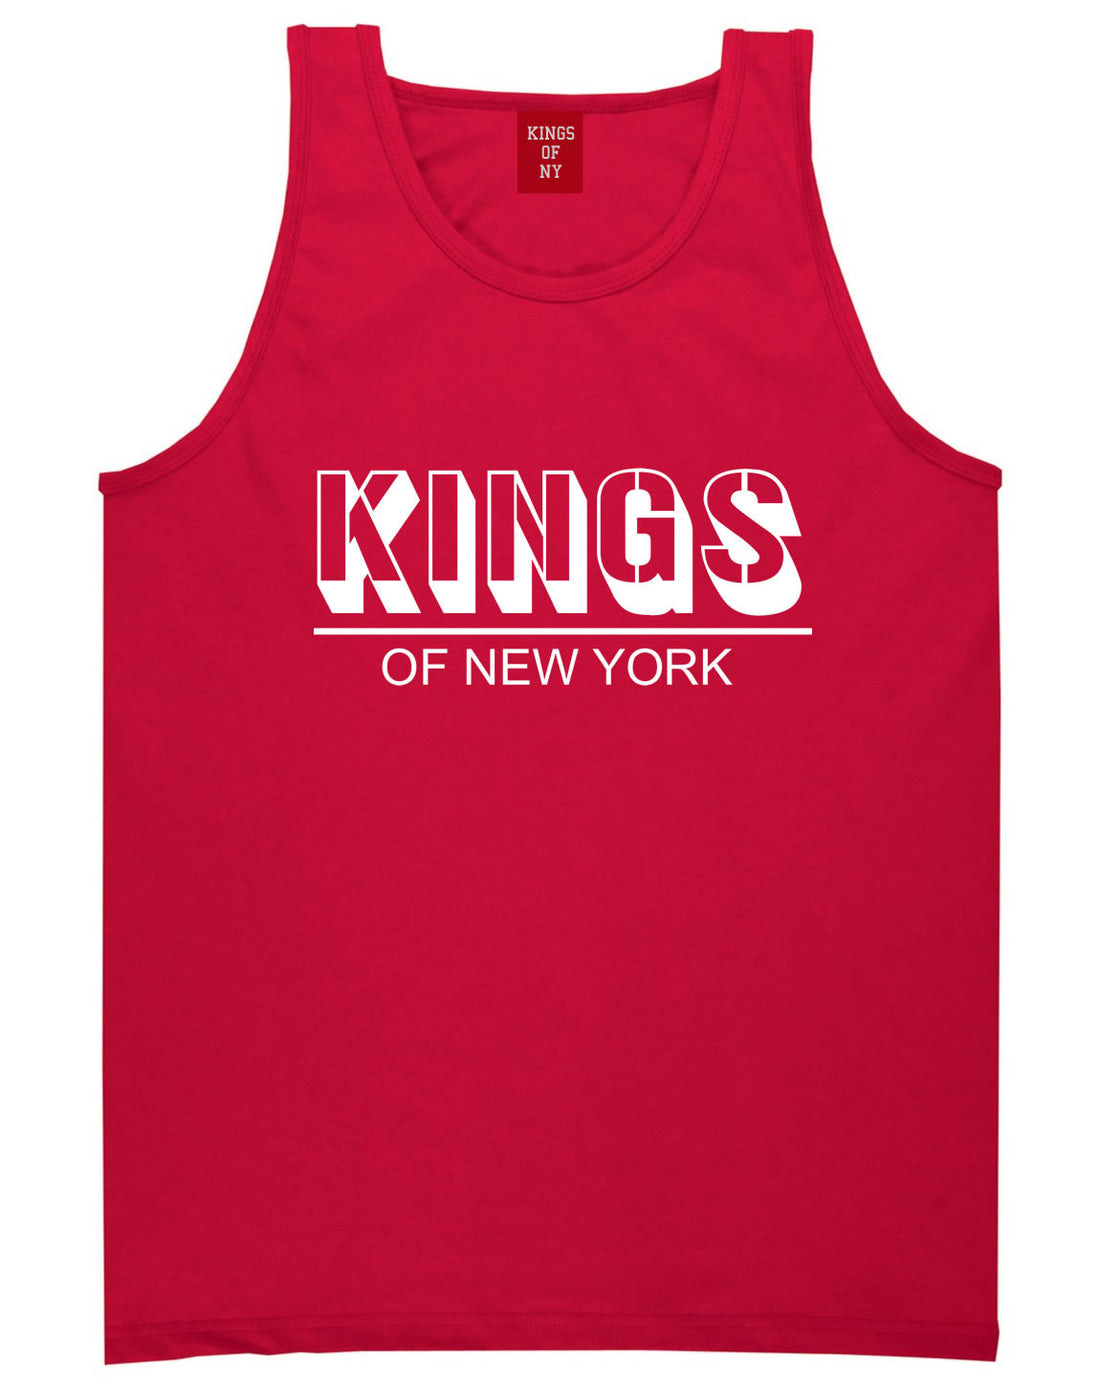 King Branded Block Letters Tank Top in Red by Kings Of NY